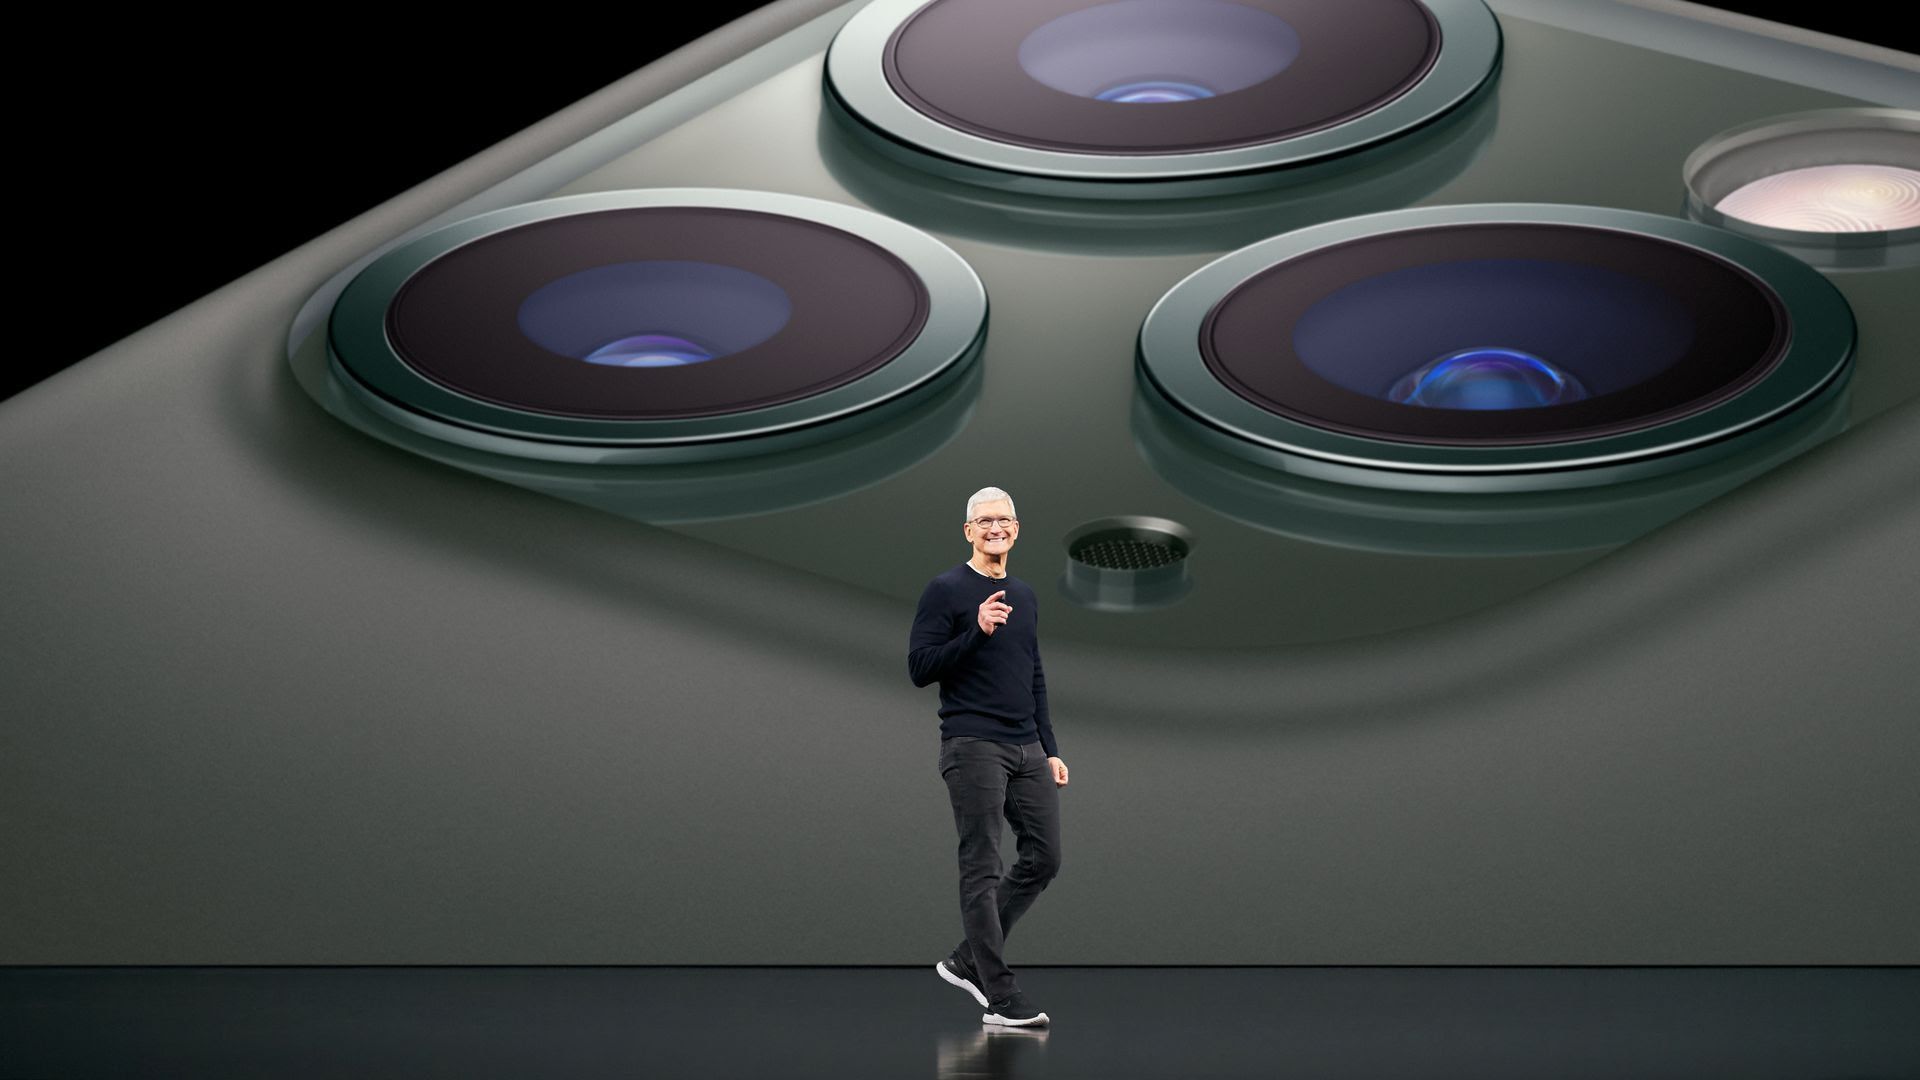 Apple CEO Tim Cook at the launch for the iPhone 11